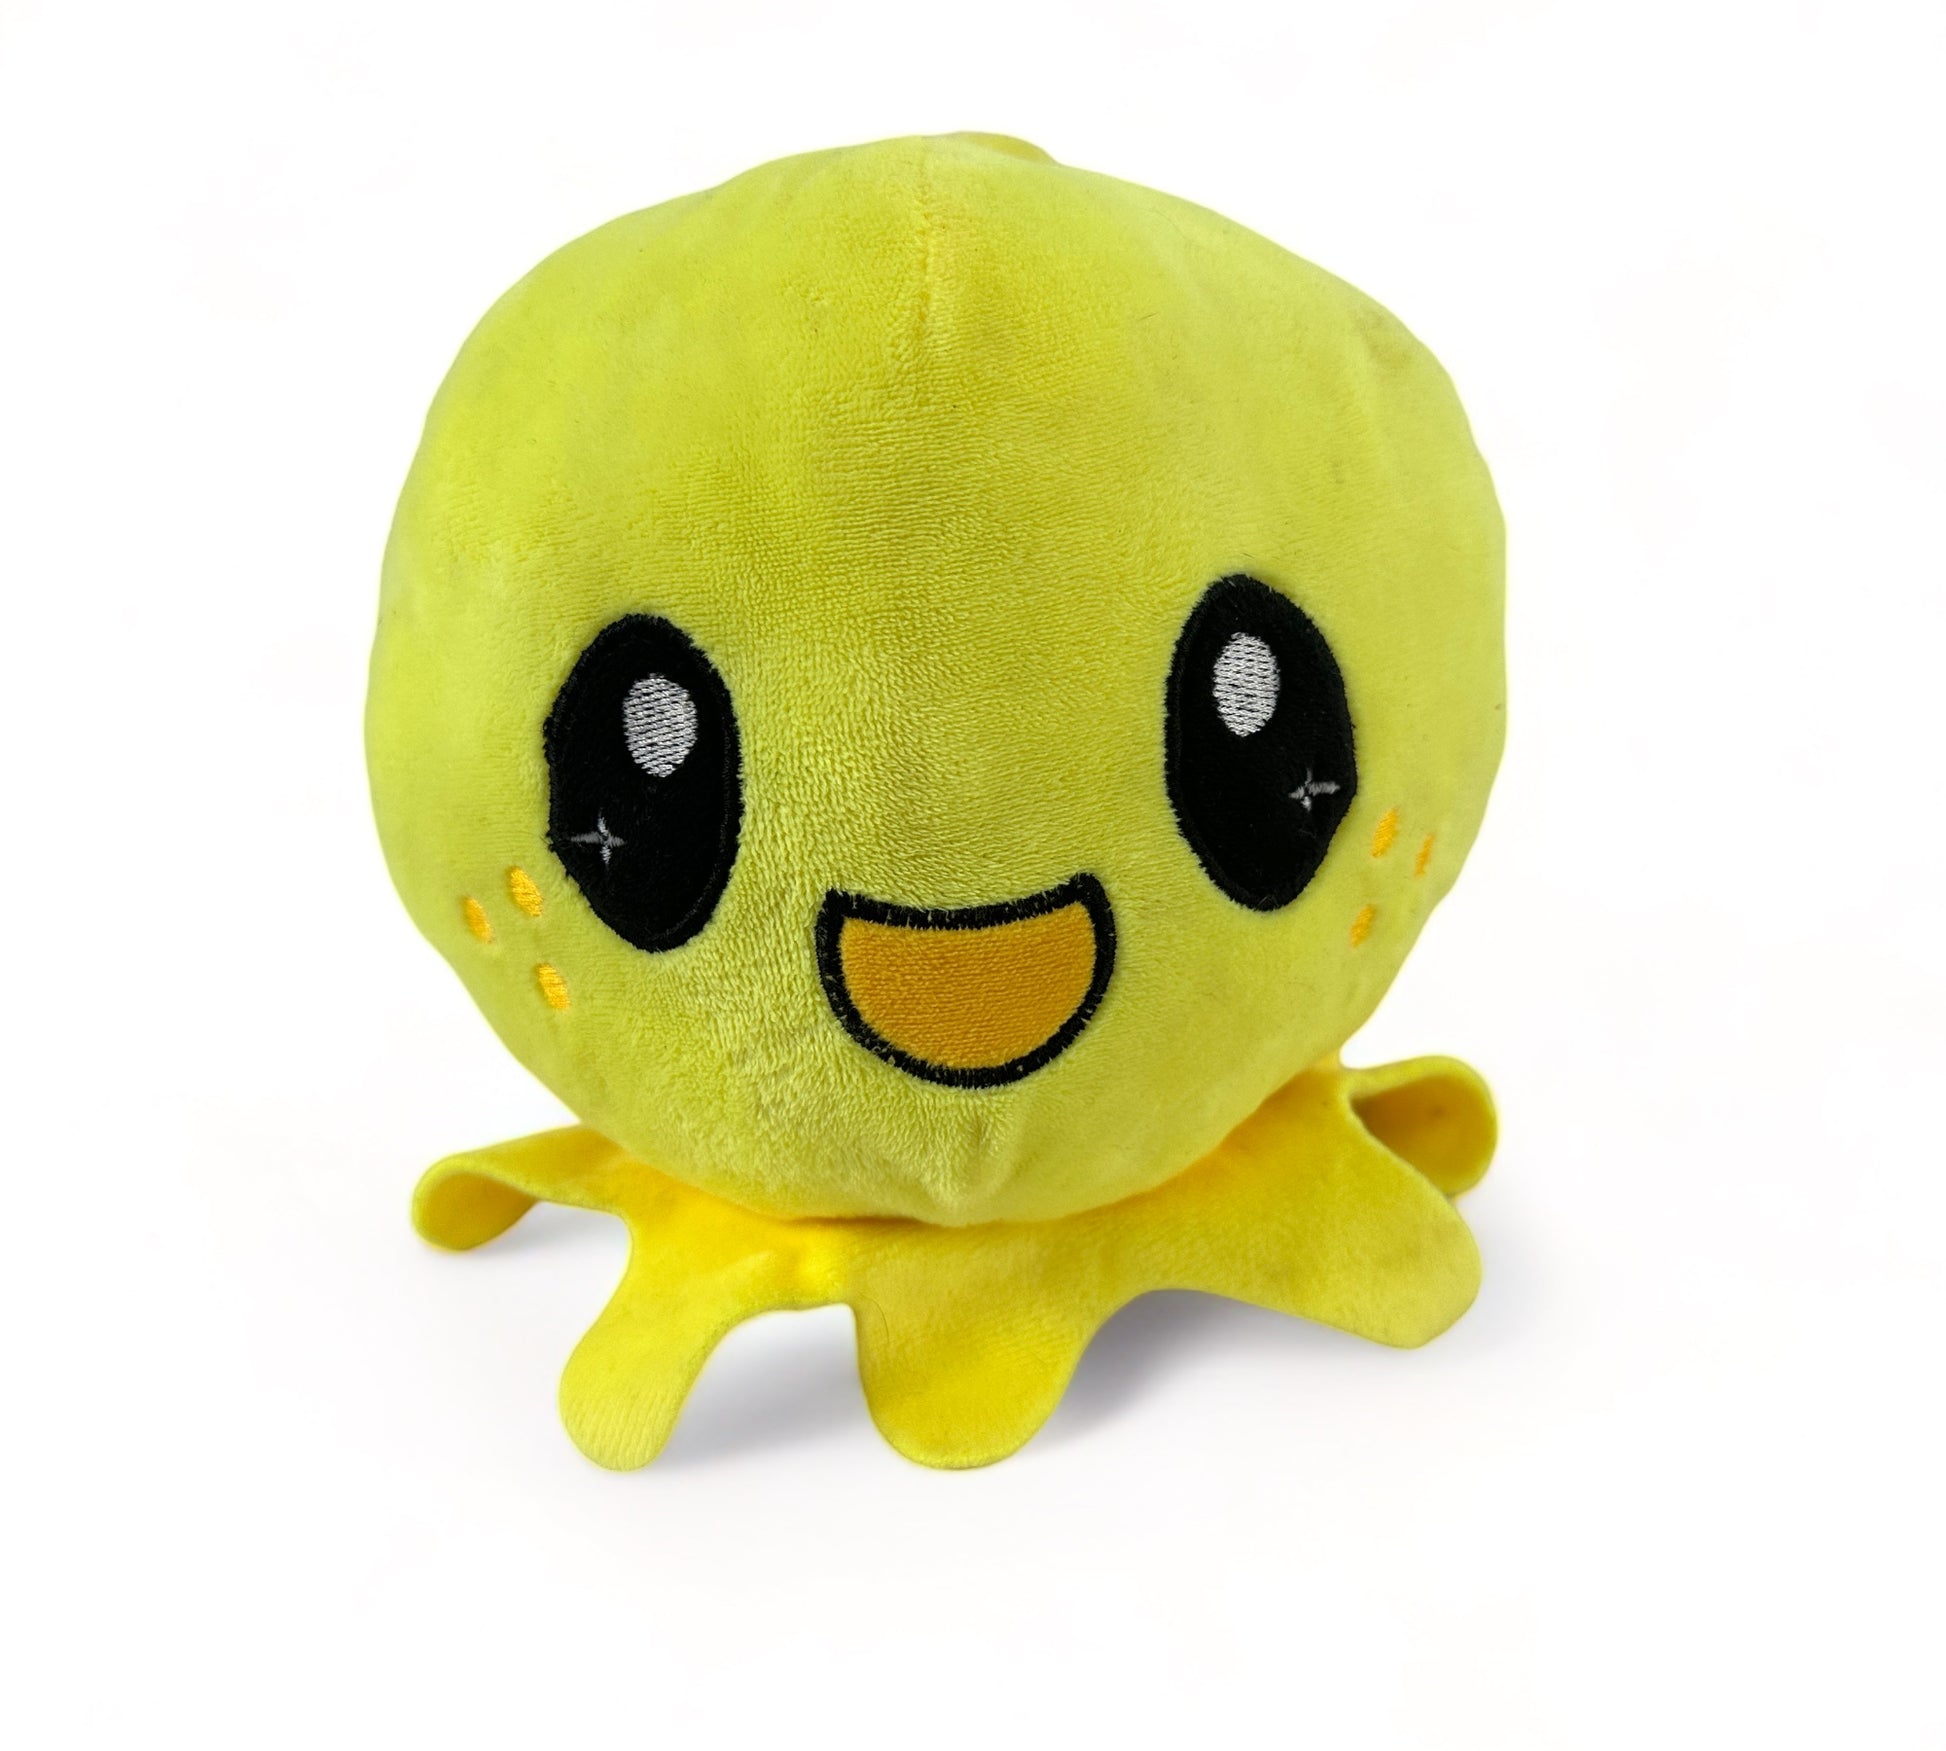 Reverse-EEZ Plush 2-in-1 Expressive Yellow and Red Octopus